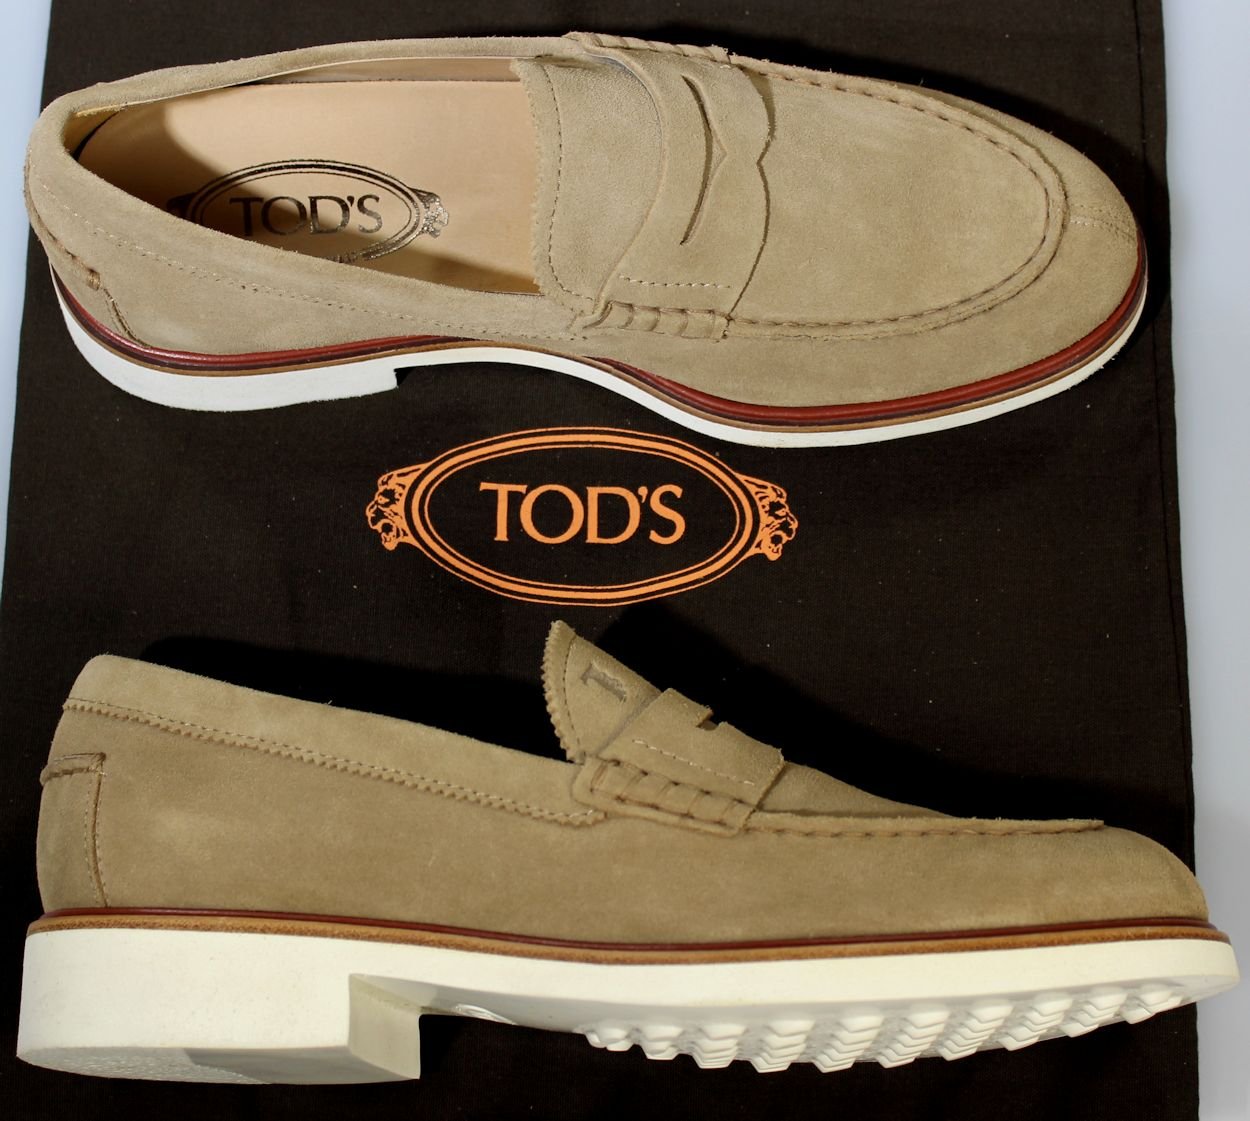 TOD'S SHOES $625 TAN LOGO EMBOSSED SPLIT TOE PEBBLE SOLE PENNY LOAFER 7